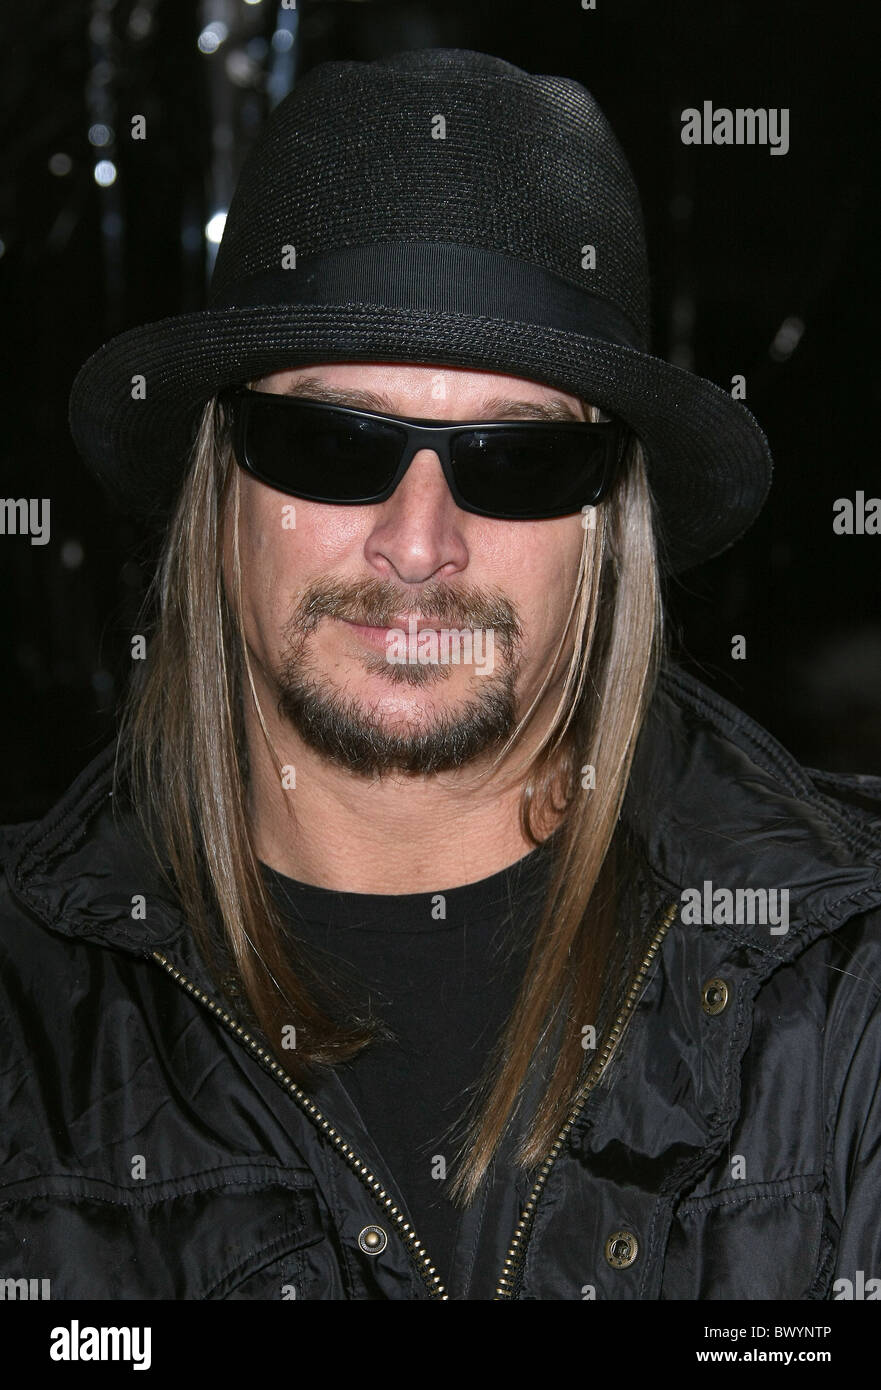 KID ROCK ROLLING STONE MAGAZINE HOSTS THE 2010 AMERICAN MUSIC AWARDS VIP AFTER PARTY HOLLYWOOD LOS ANGELES CALIFORNIA USA 21 Stock Photo